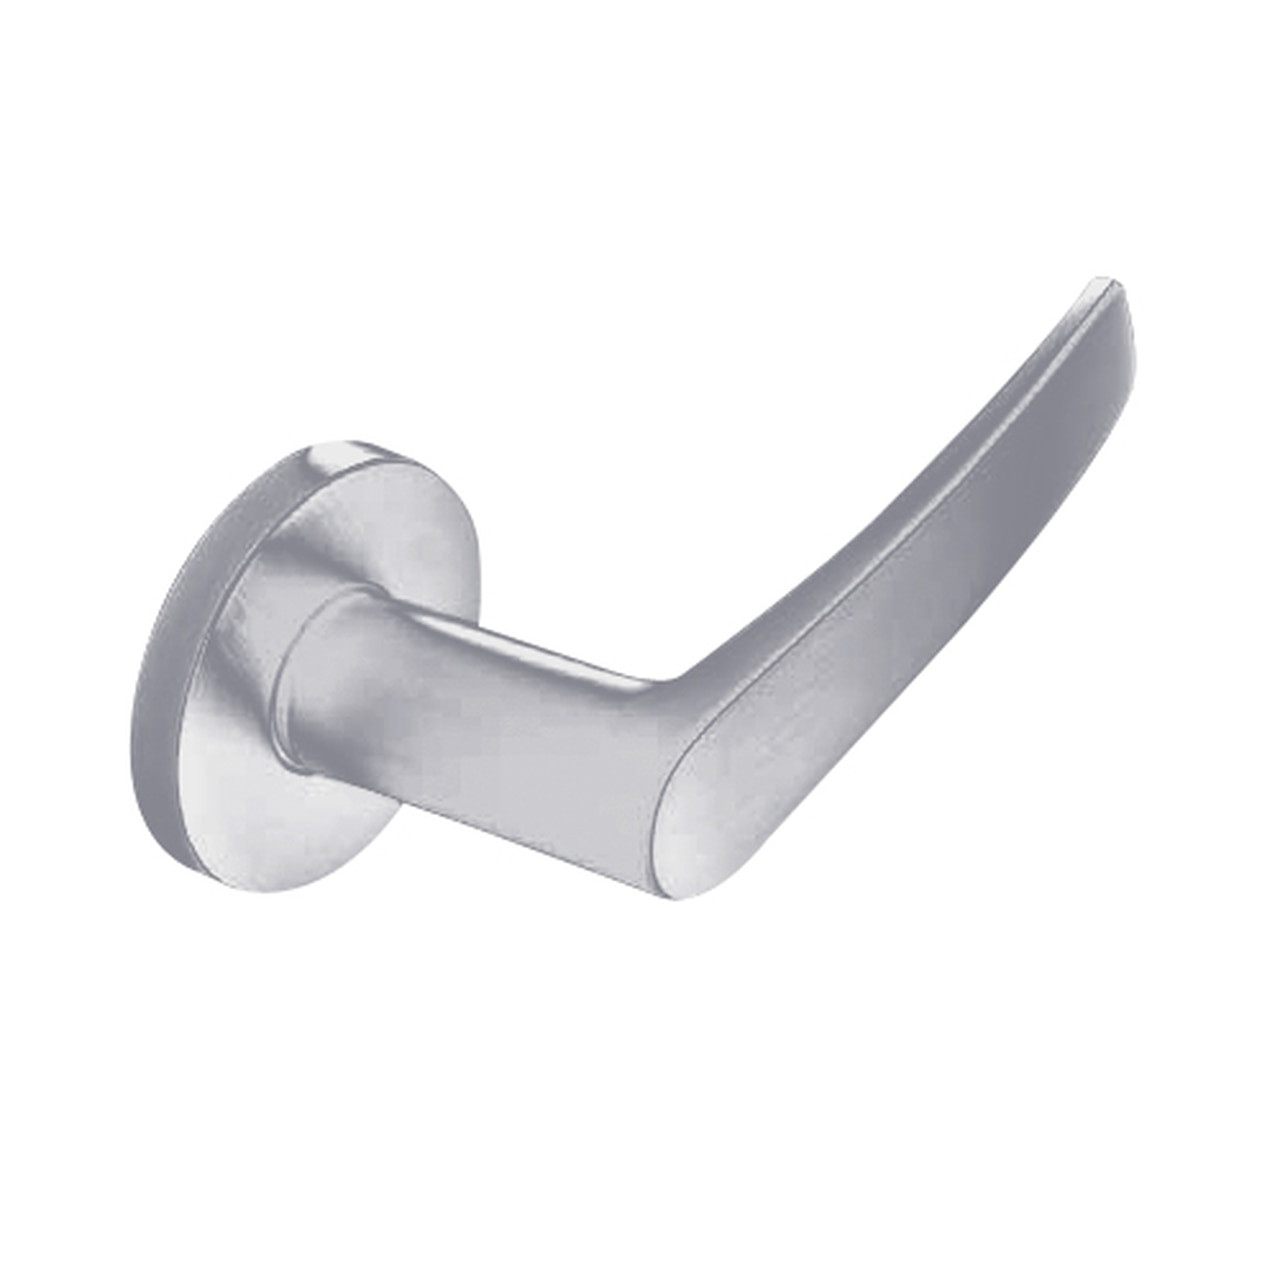 ML2056-ASB-626-M31 Corbin Russwin ML2000 Series Mortise Classroom Trim Pack with Armstrong Lever in Satin Chrome